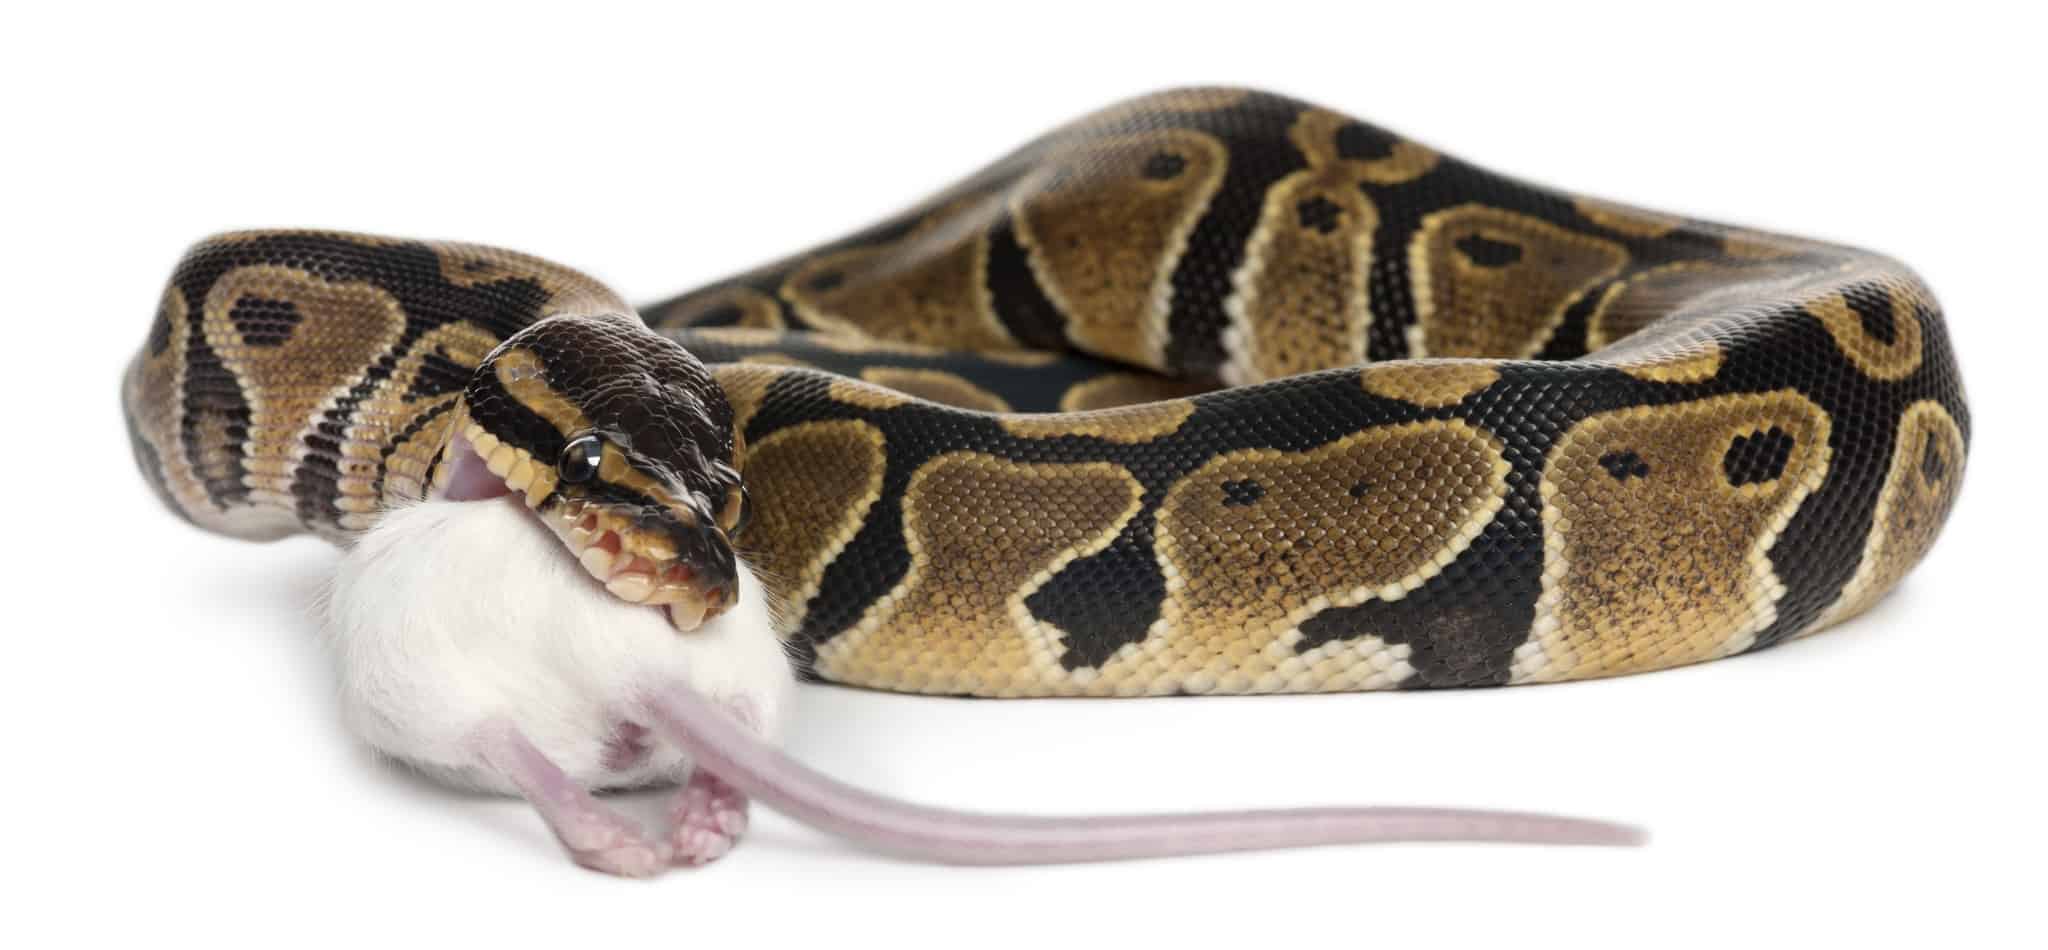 what happens when a ball python bites What Happens When a Ball Python Bites?